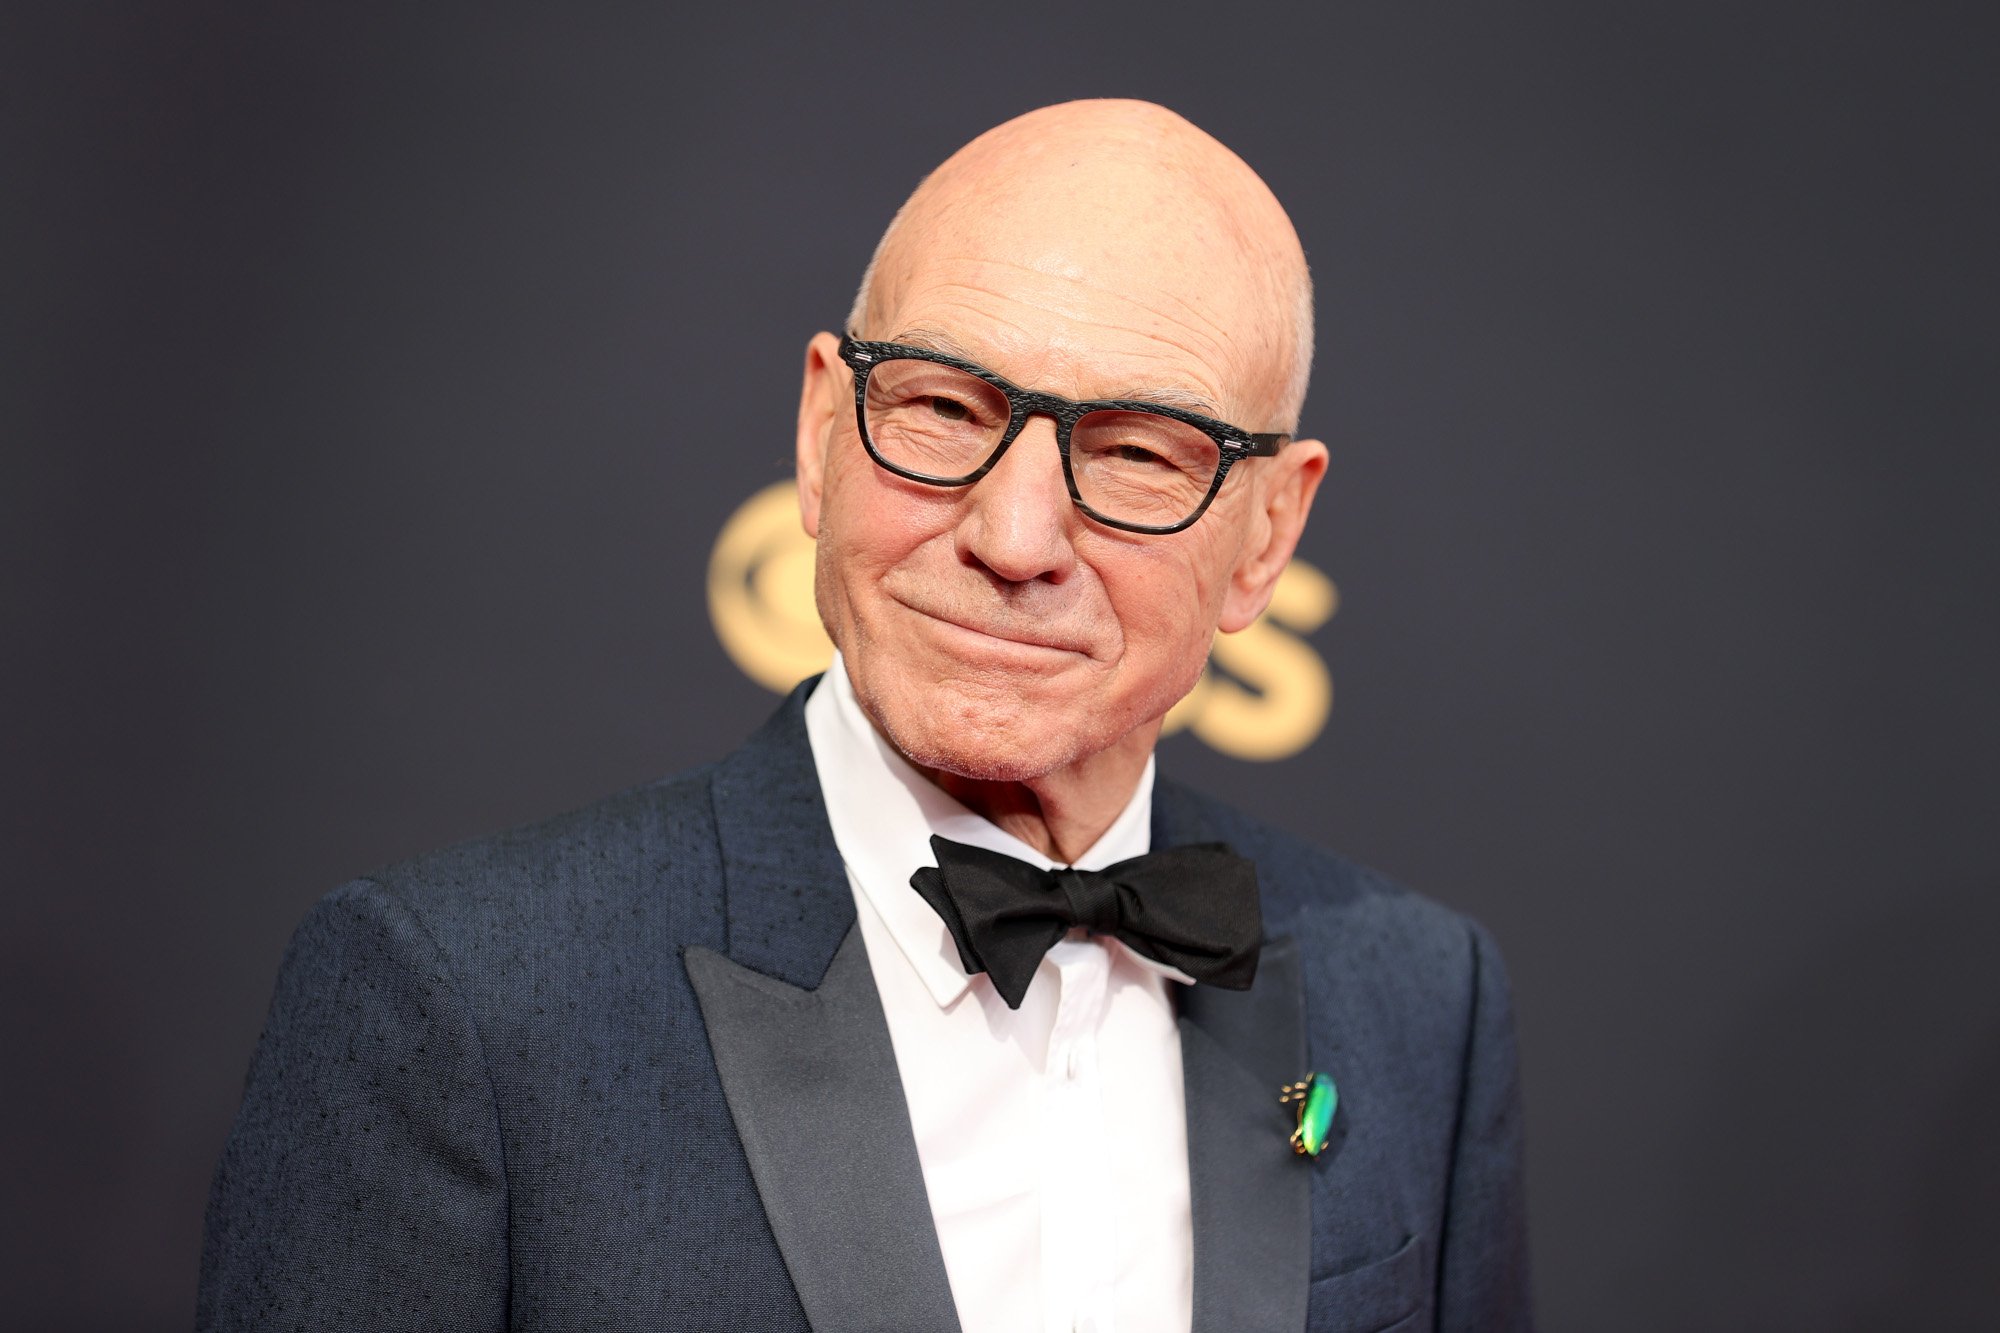 Professor X actor Sir Patrick Stewart wearing glasses, a black suit, and a black bowtie.